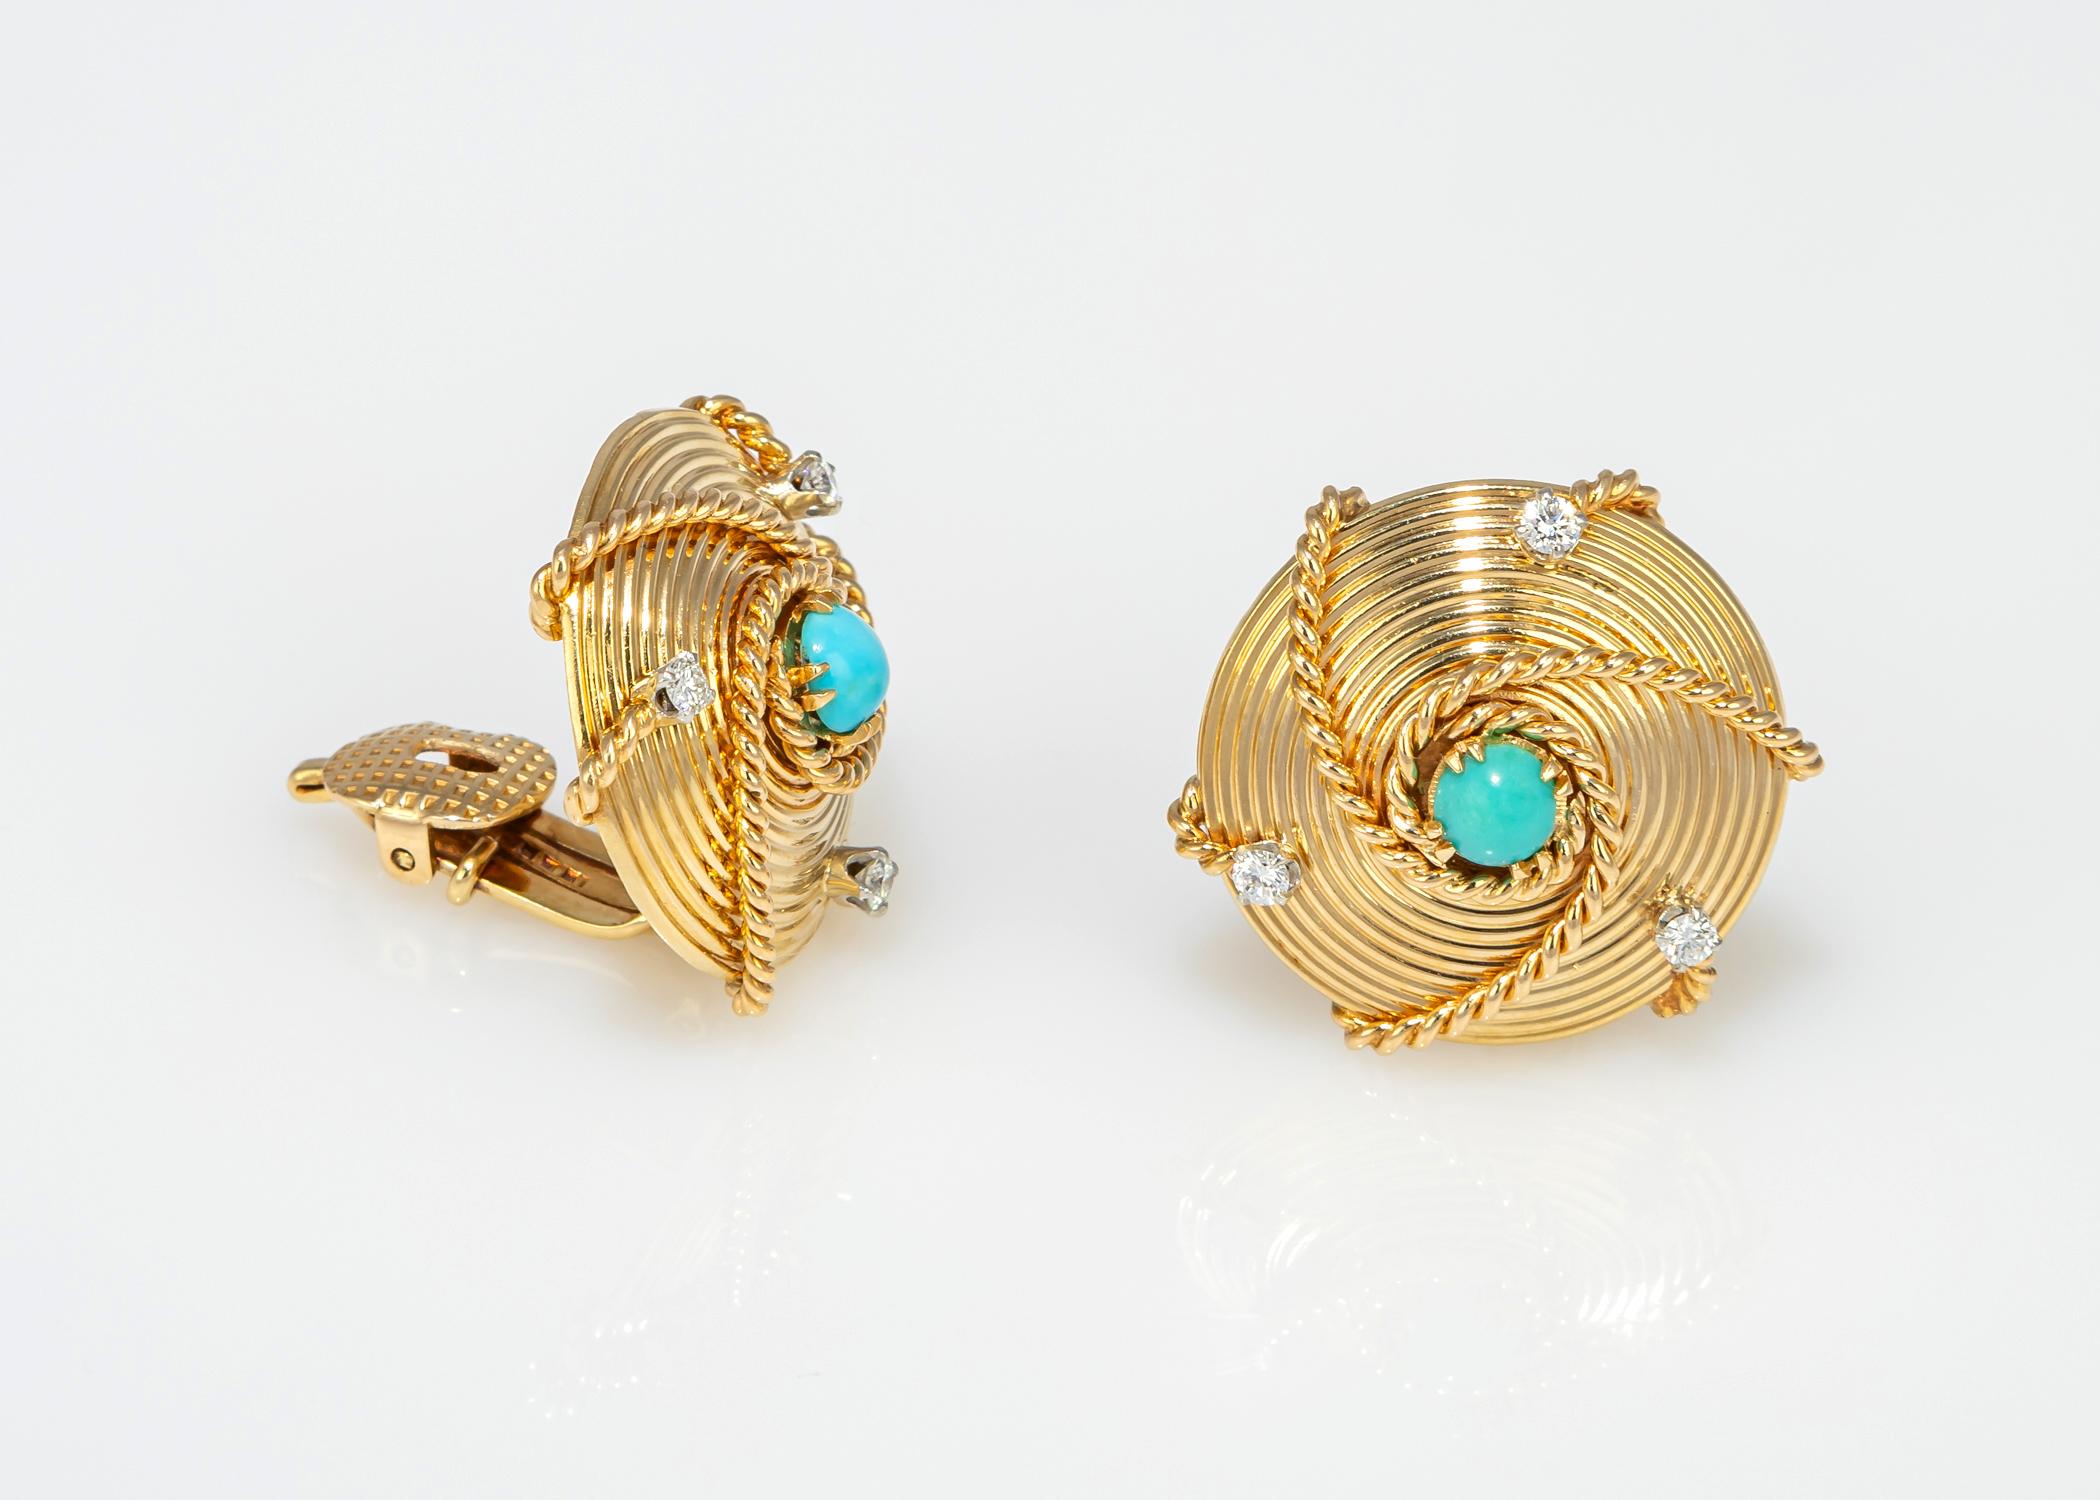 Fantastic Cartier midcentury earrings featuring turquoise and diamonds. Chic and wearable at 1 inch in size. 